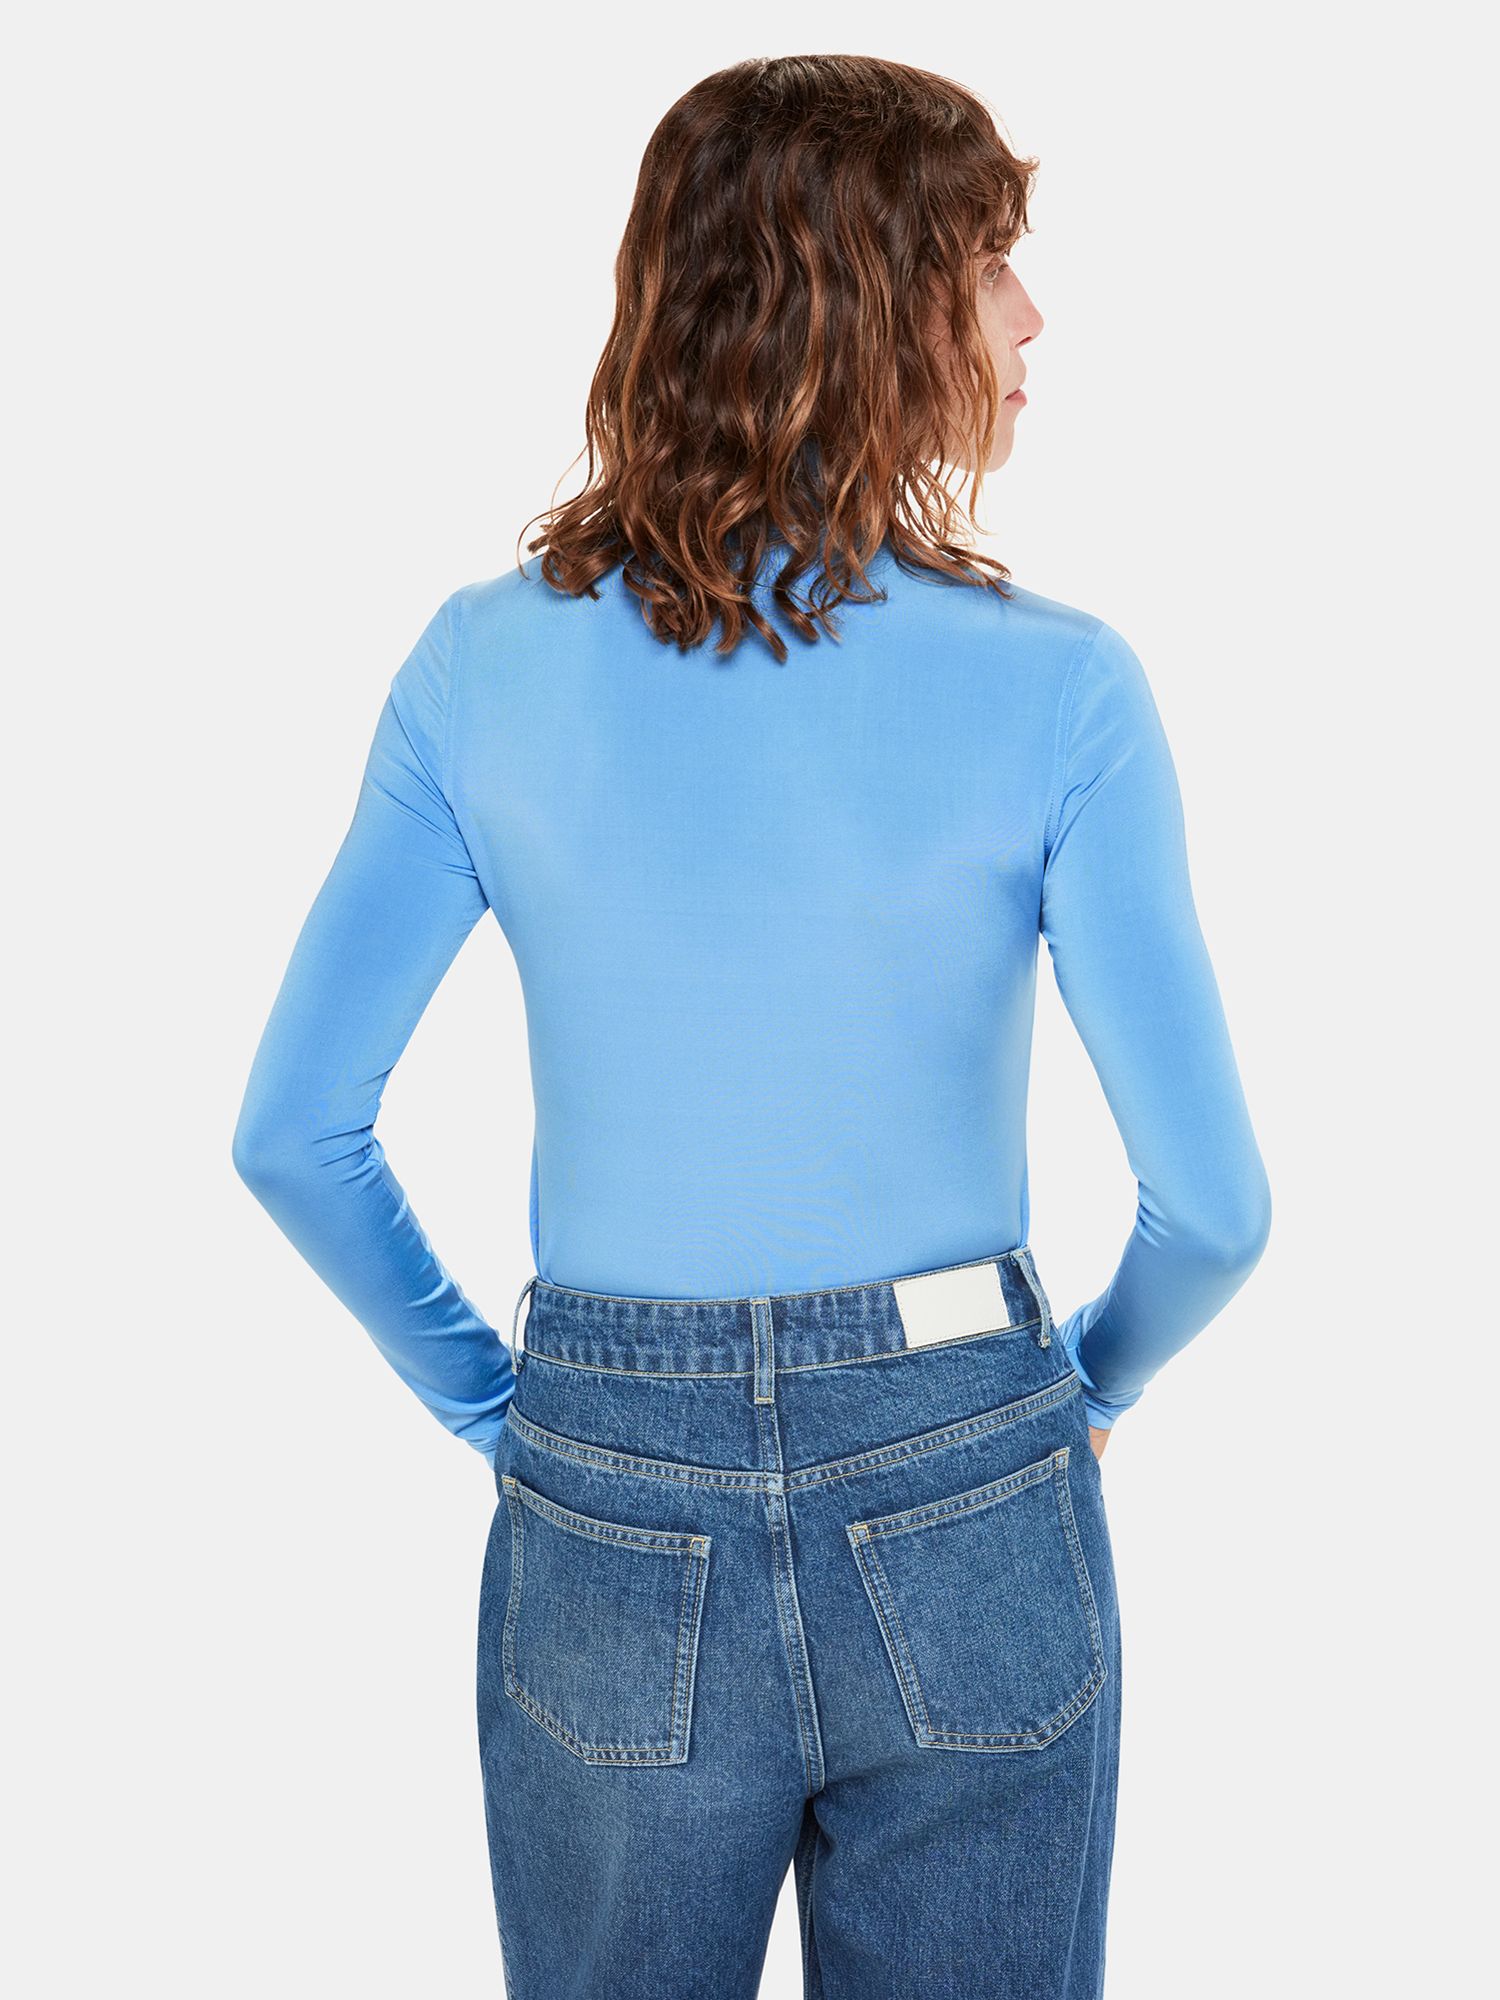 Buy Whistles Slinky High Neck Top Online at johnlewis.com